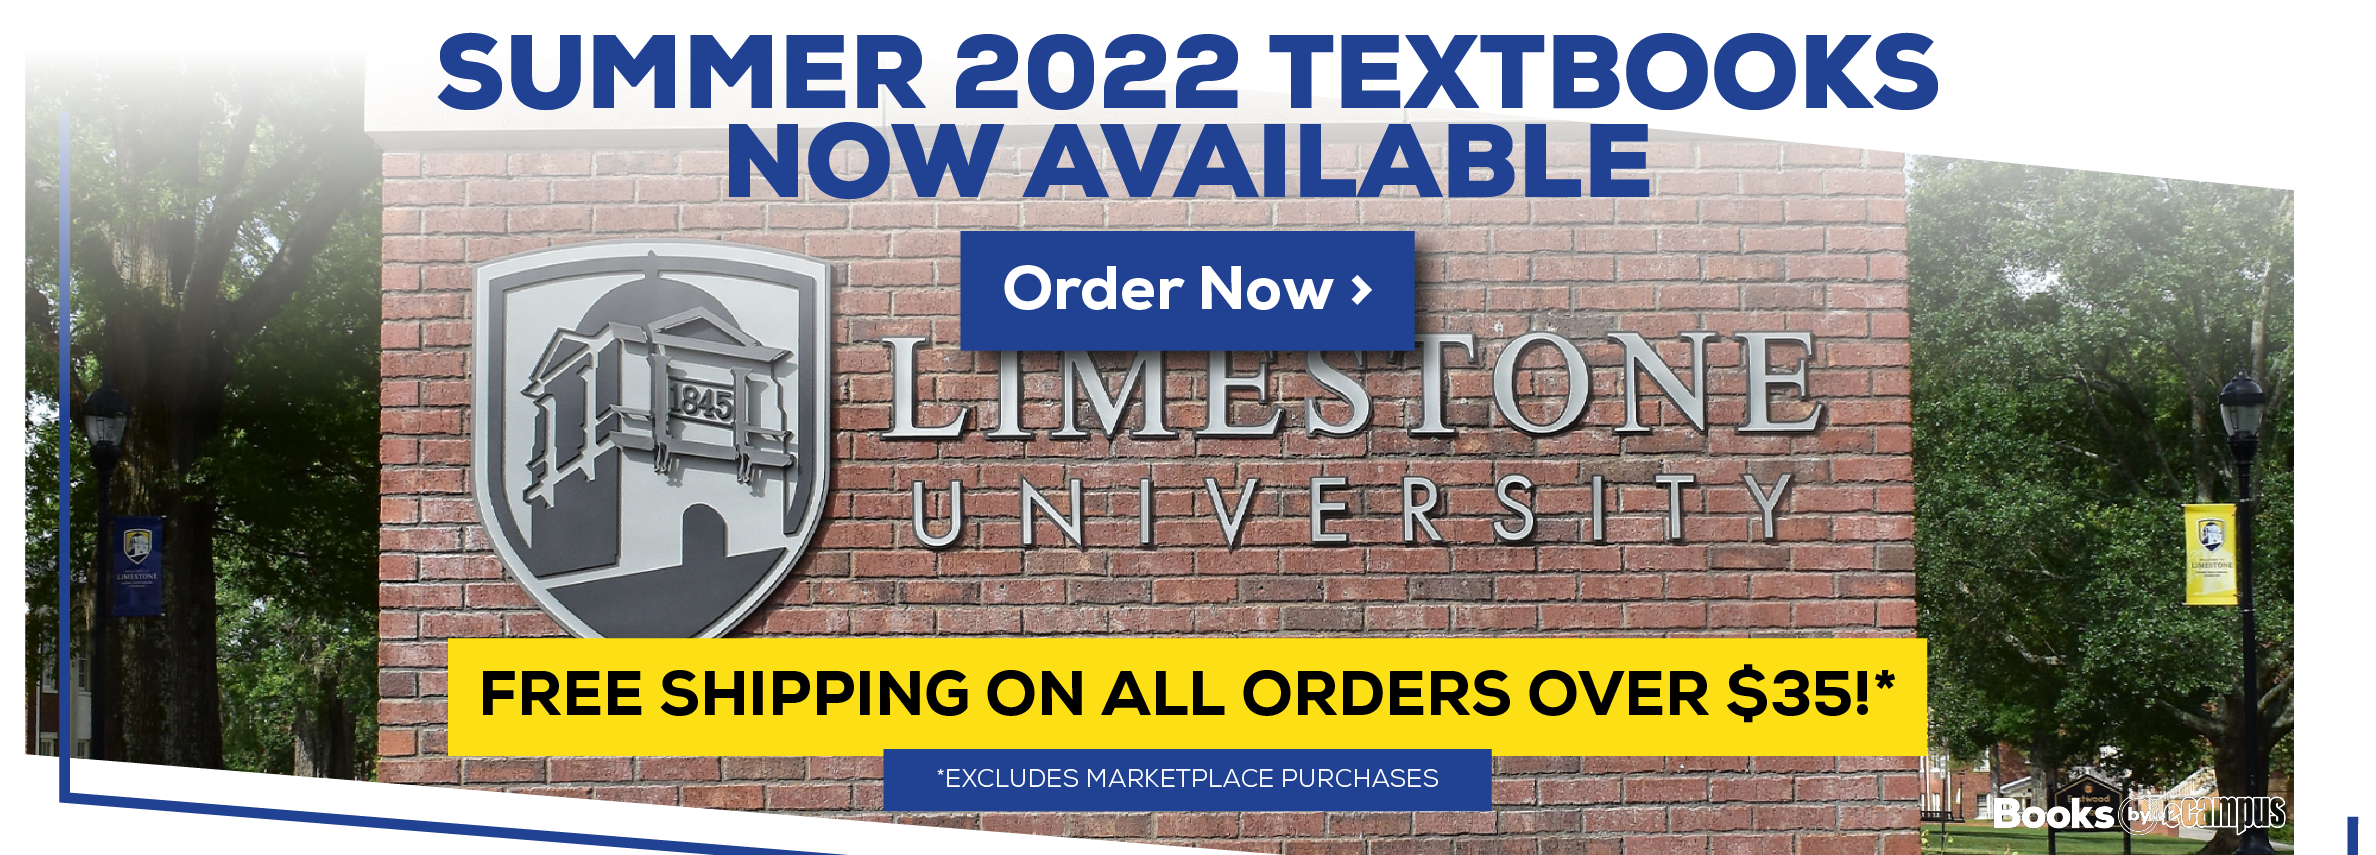 Summer 2022 Textbooks now available. Order now. Free shipping on all orders over $35.